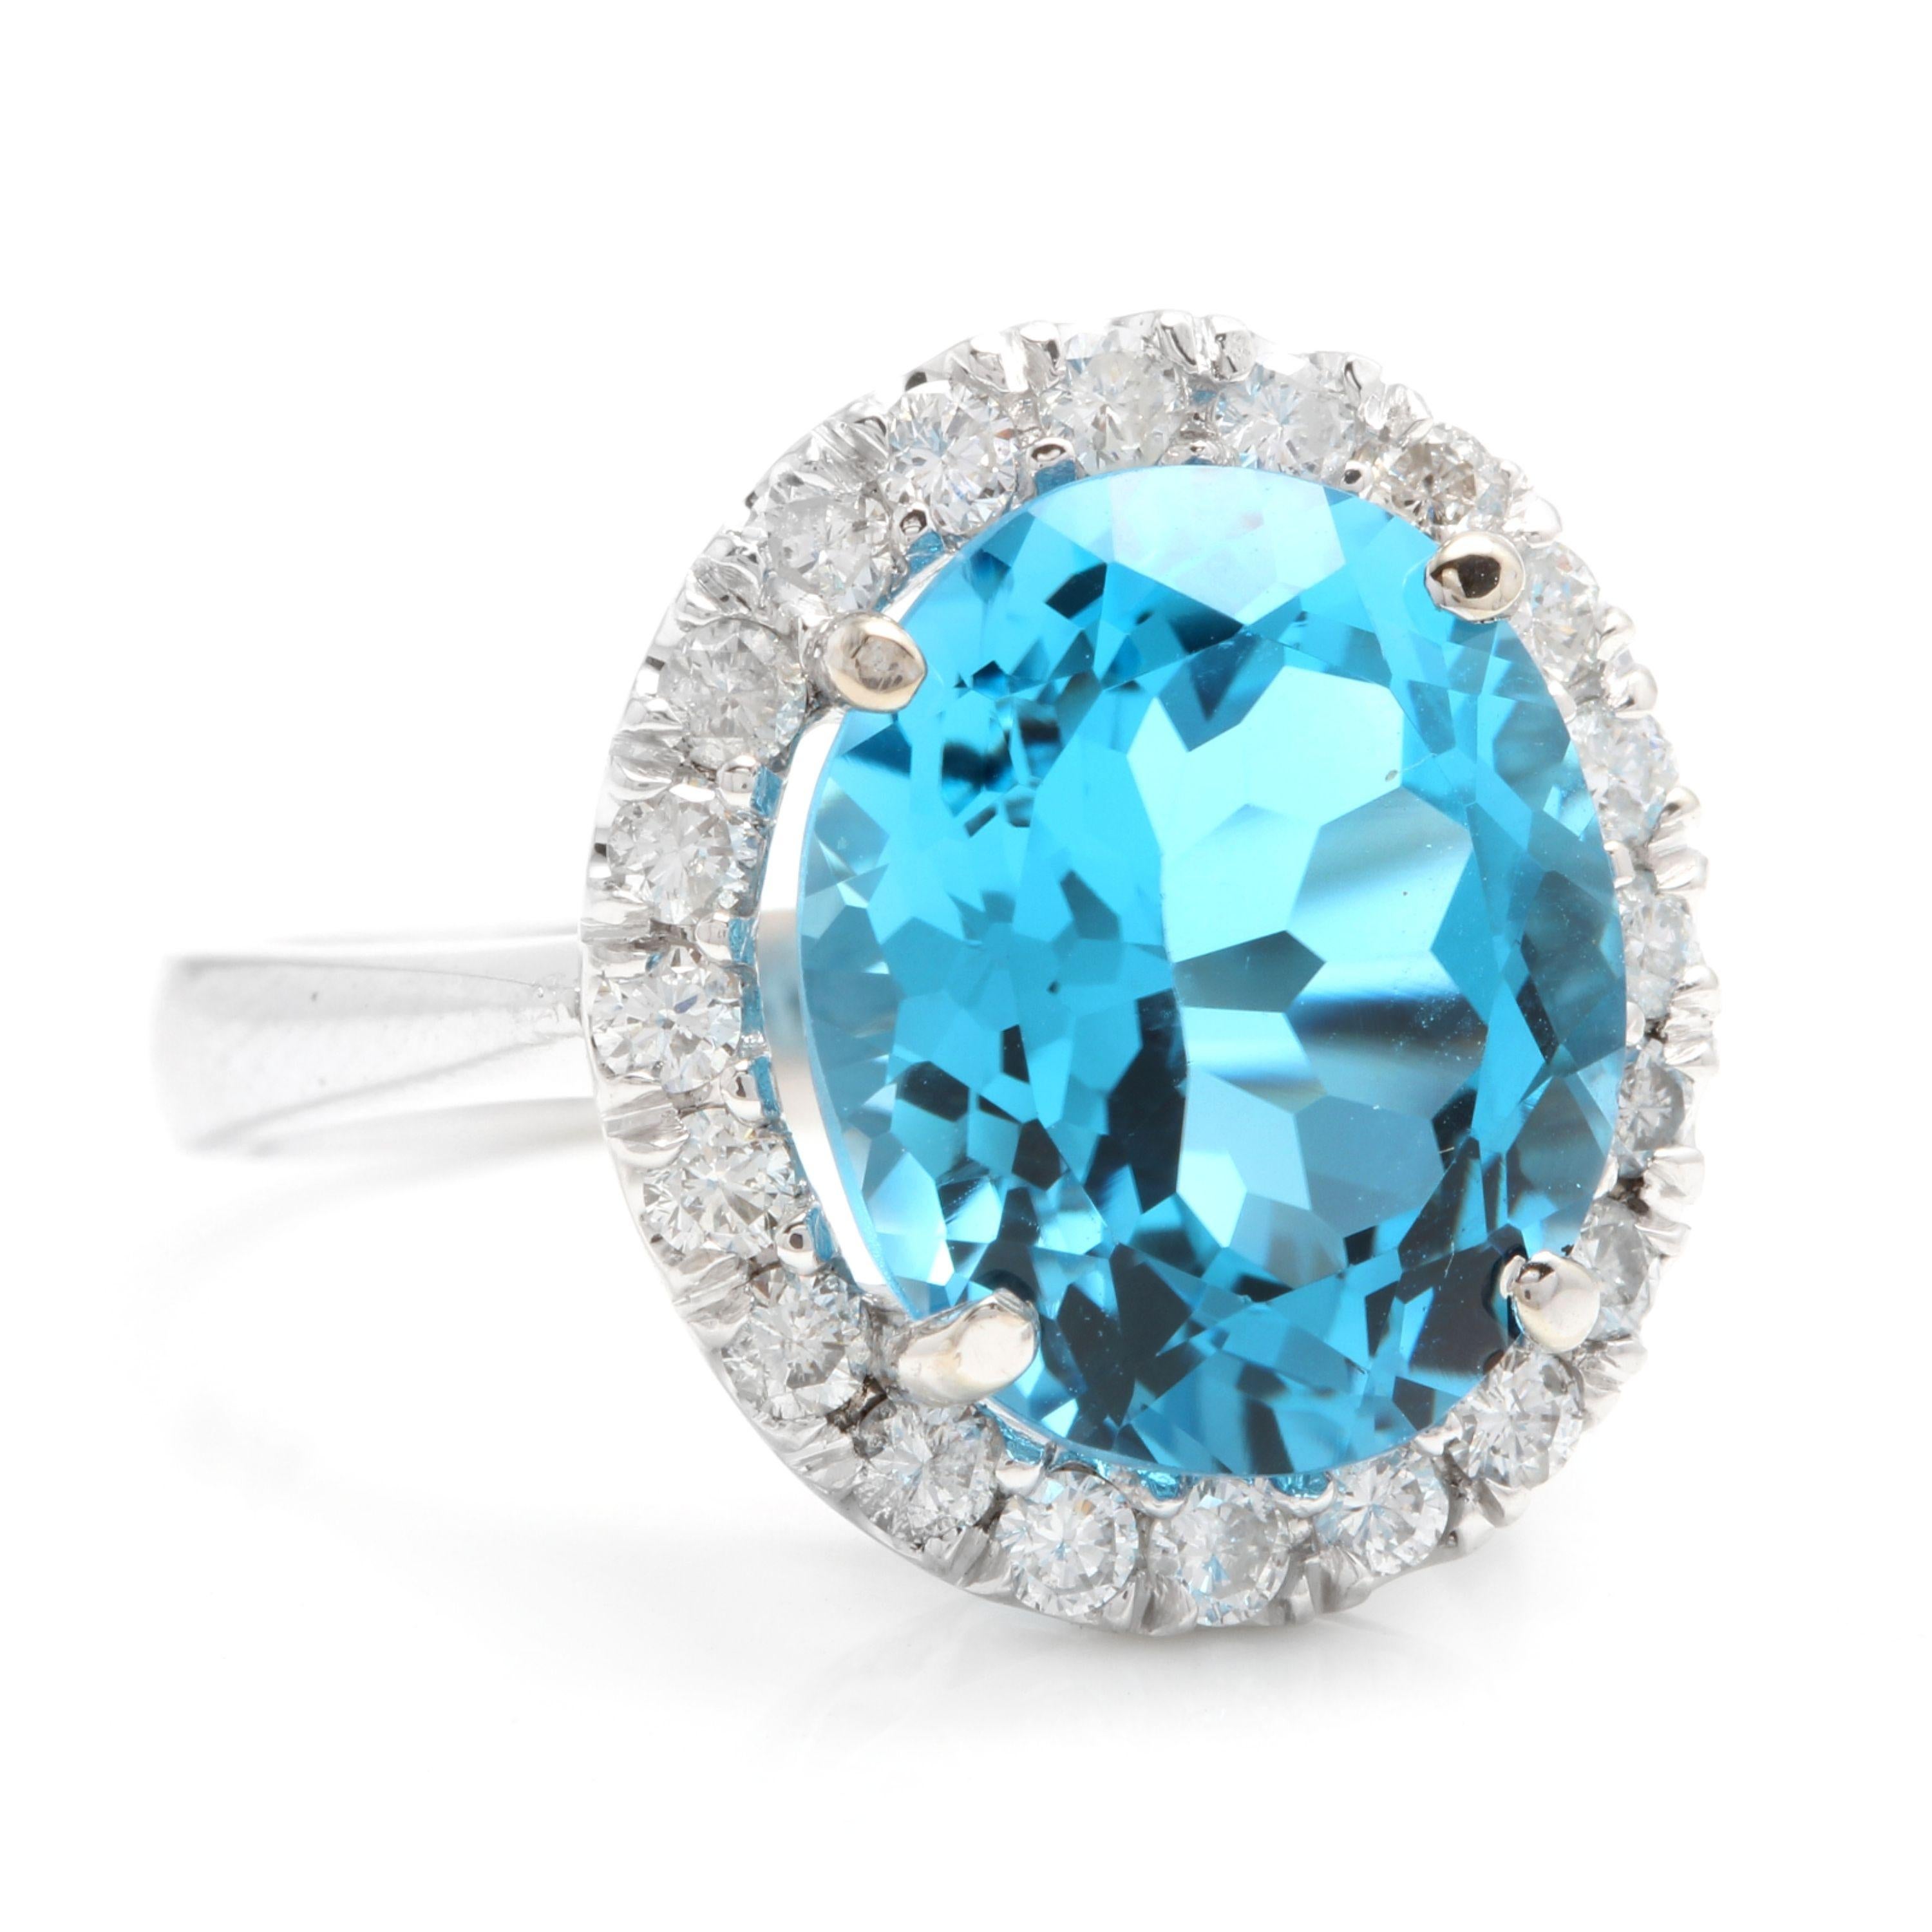 11.00 Carats Impressive Natural Swiss Blue Topaz and Diamond 14K Solid White Gold Ring

Total Swiss Topaz Weight is: Approx. 10.00 Carats

Topaz Treatment: Heating

Topaz Measures: Approx. 14.00 x 10.00mm

Natural Round Diamonds Weight: Approx. 1.00